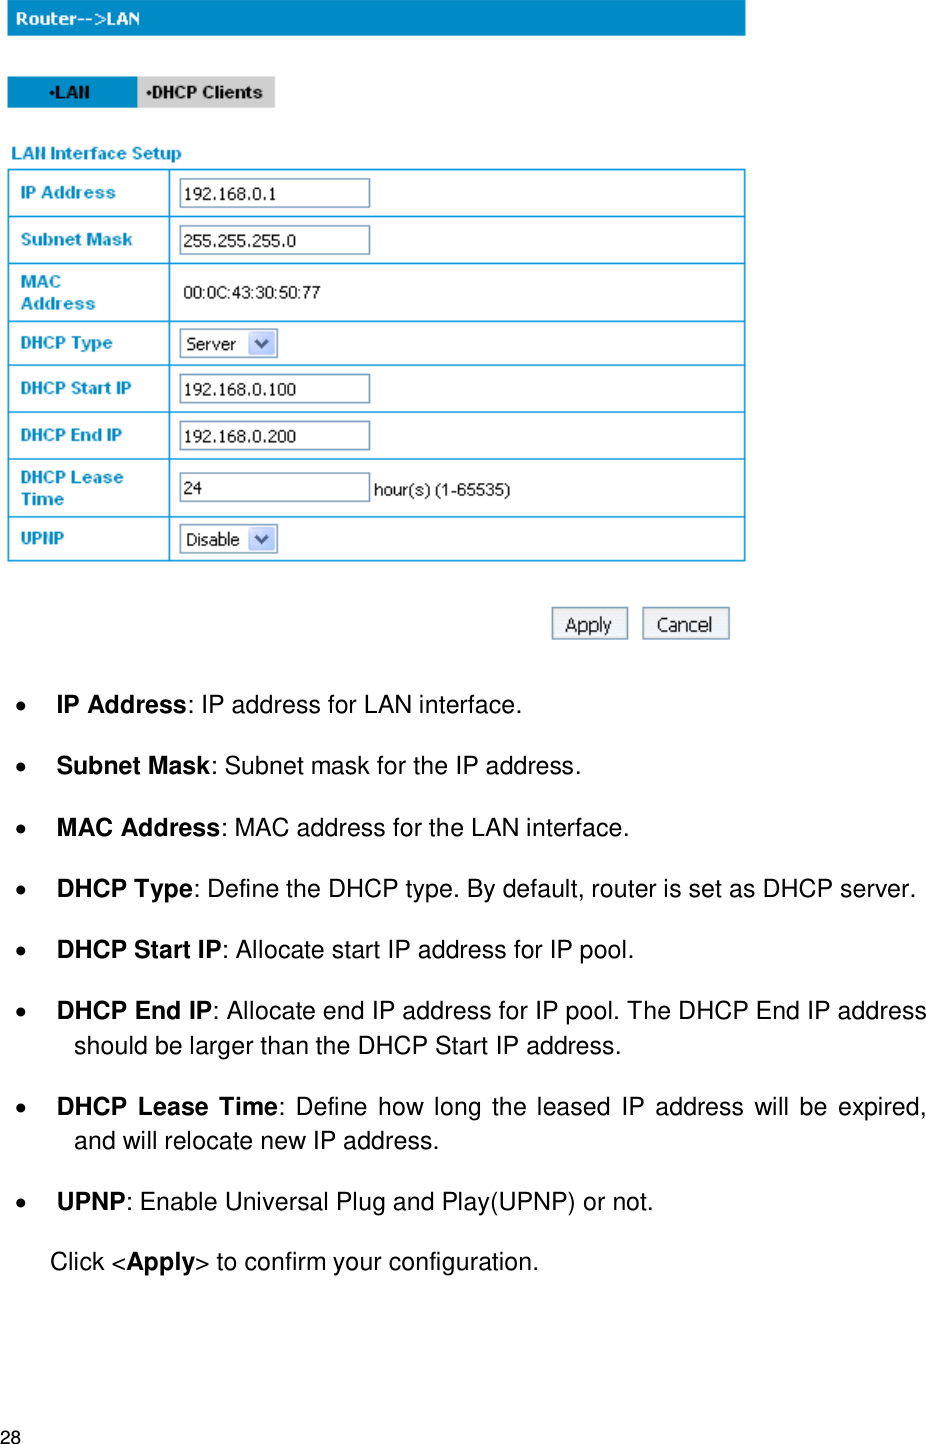 28   IP Address: IP address for LAN interface.  Subnet Mask: Subnet mask for the IP address.  MAC Address: MAC address for the LAN interface.  DHCP Type: Define the DHCP type. By default, router is set as DHCP server.  DHCP Start IP: Allocate start IP address for IP pool.  DHCP End IP: Allocate end IP address for IP pool. The DHCP End IP address should be larger than the DHCP Start IP address.  DHCP Lease Time:  Define how long the leased IP address will be expired, and will relocate new IP address.  UPNP: Enable Universal Plug and Play(UPNP) or not. Click &lt;Apply&gt; to confirm your configuration. 